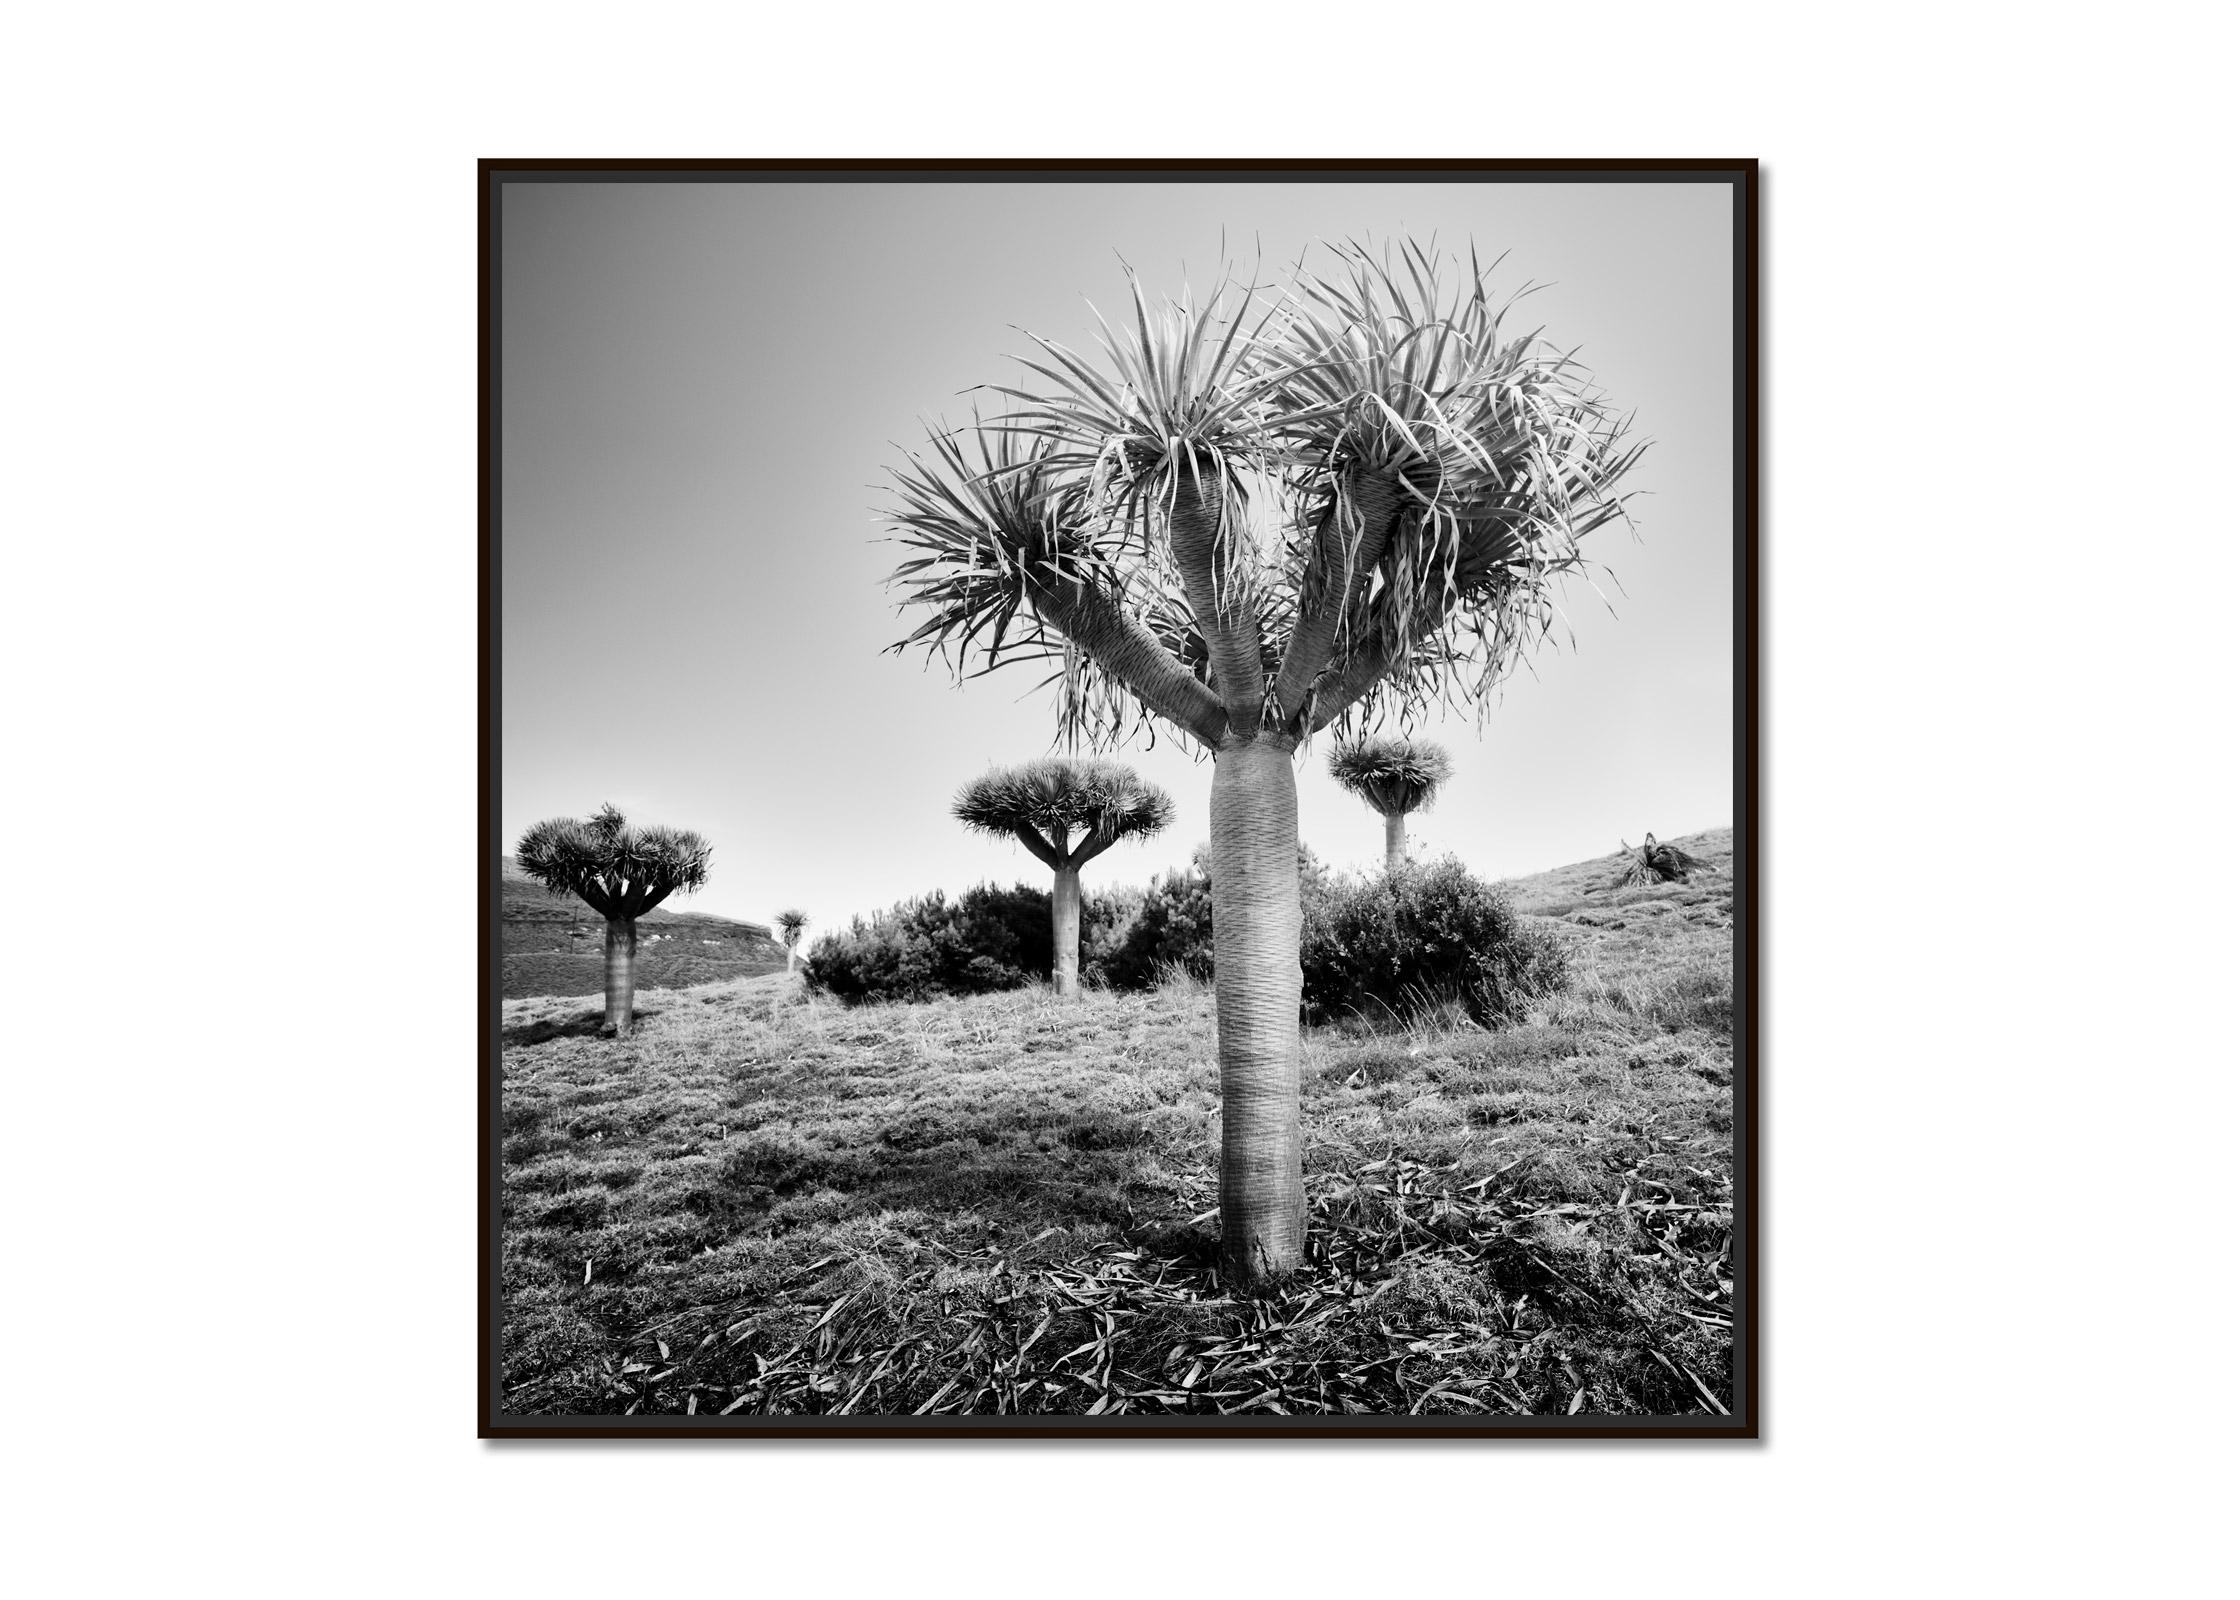 Canary Islands Dragon Tree, Madeira, black white fine art Landscape photography - Photograph by Gerald Berghammer